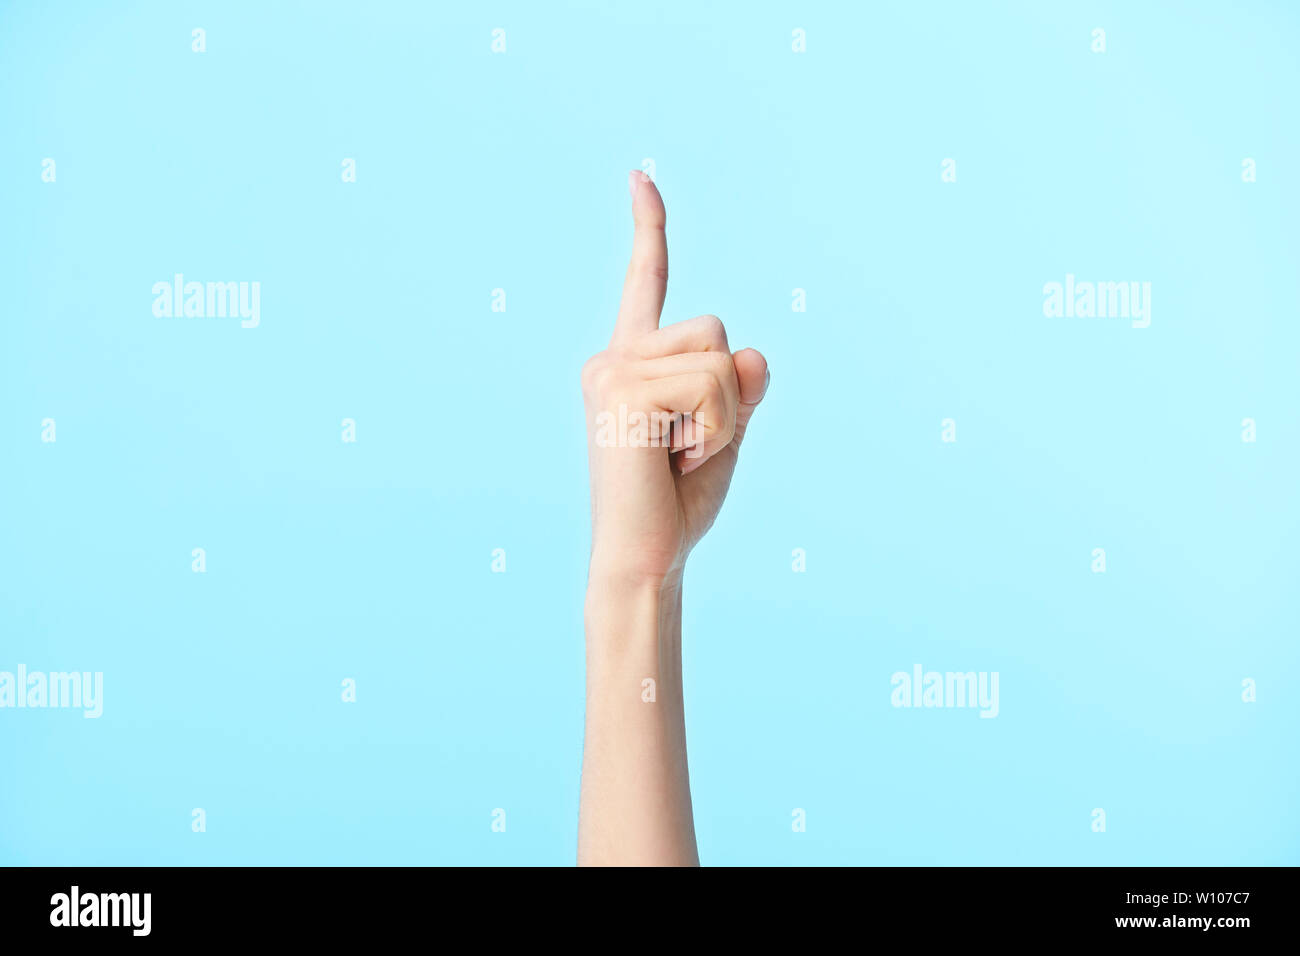 human hand showing number one, isolated on blue background Stock Photo